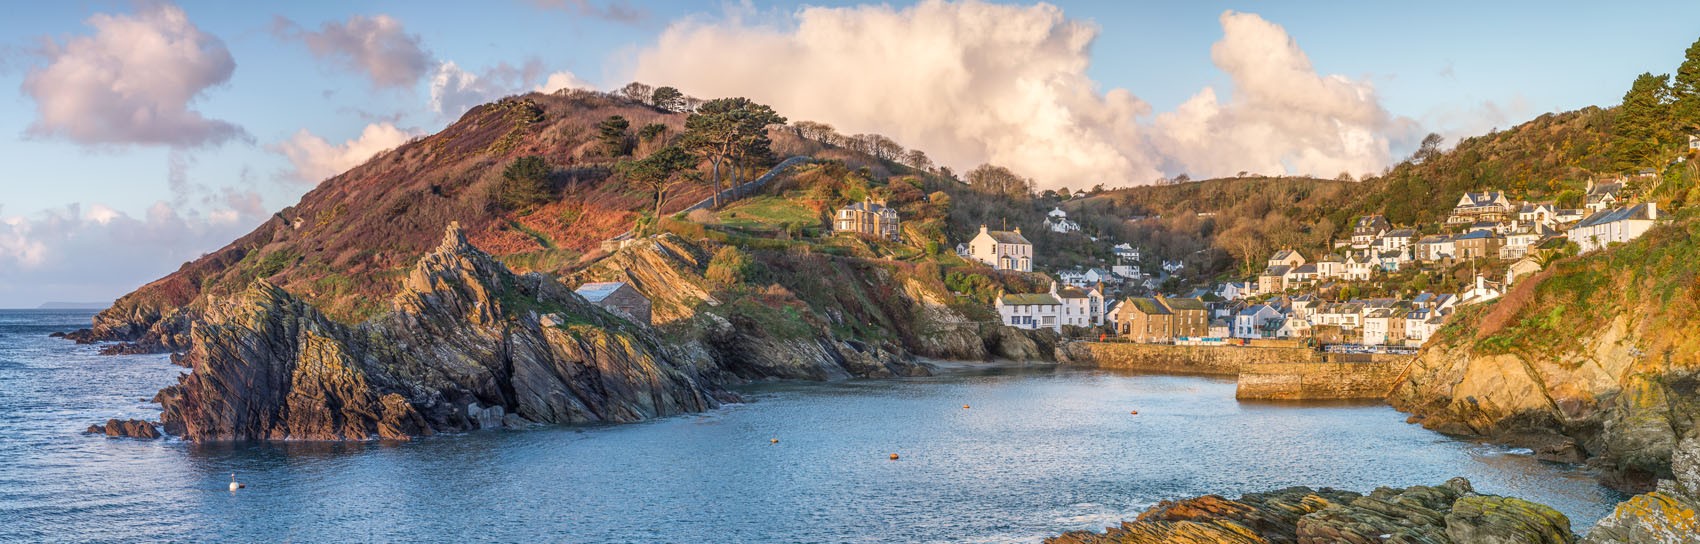 Polperro Harbour in Cornwall. Photograph by MICK BLAKEY